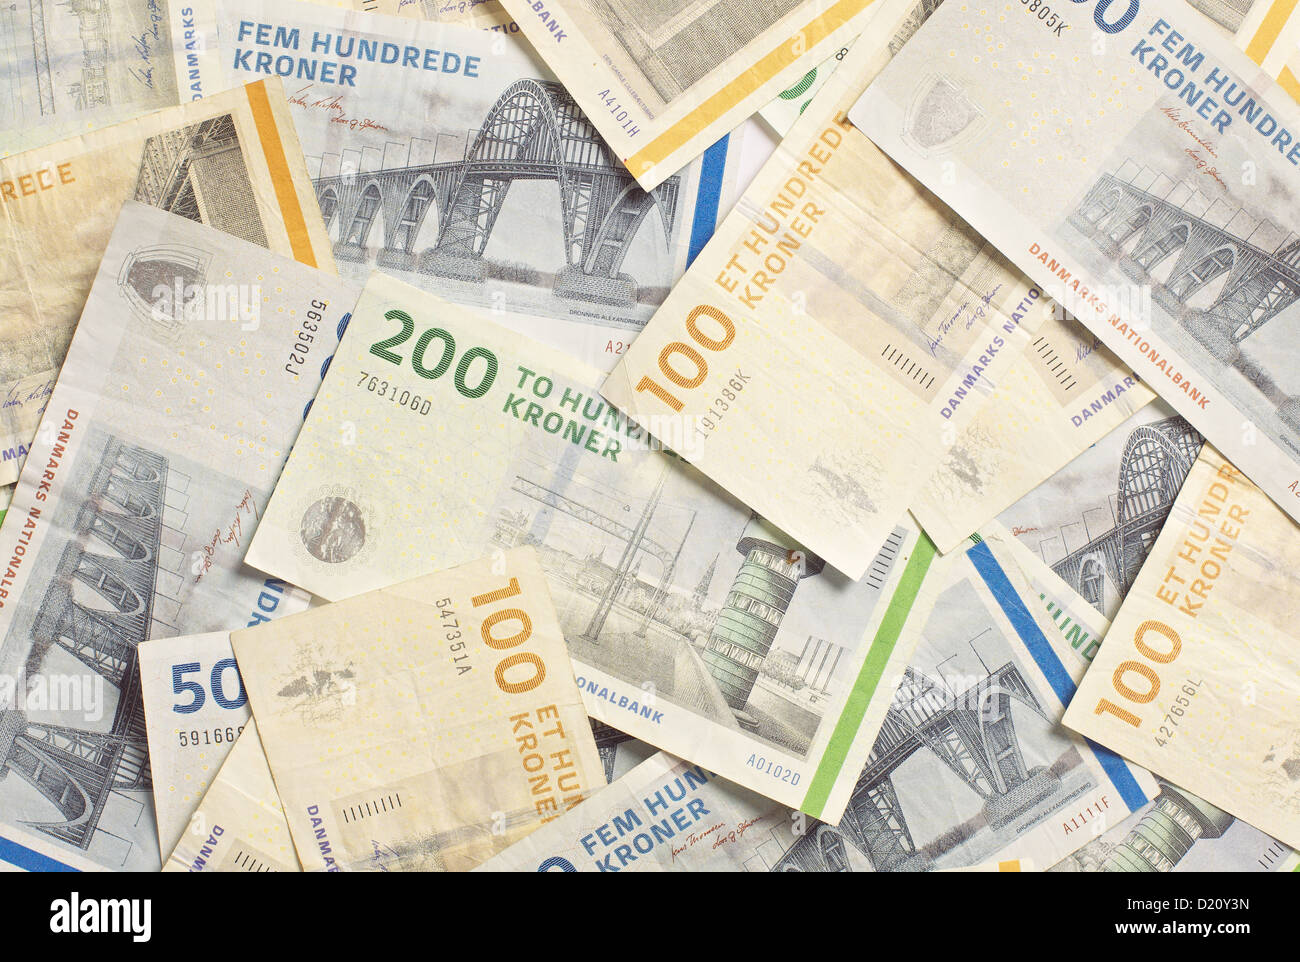 Denmark's banknotes, in different denominations Stock Photo